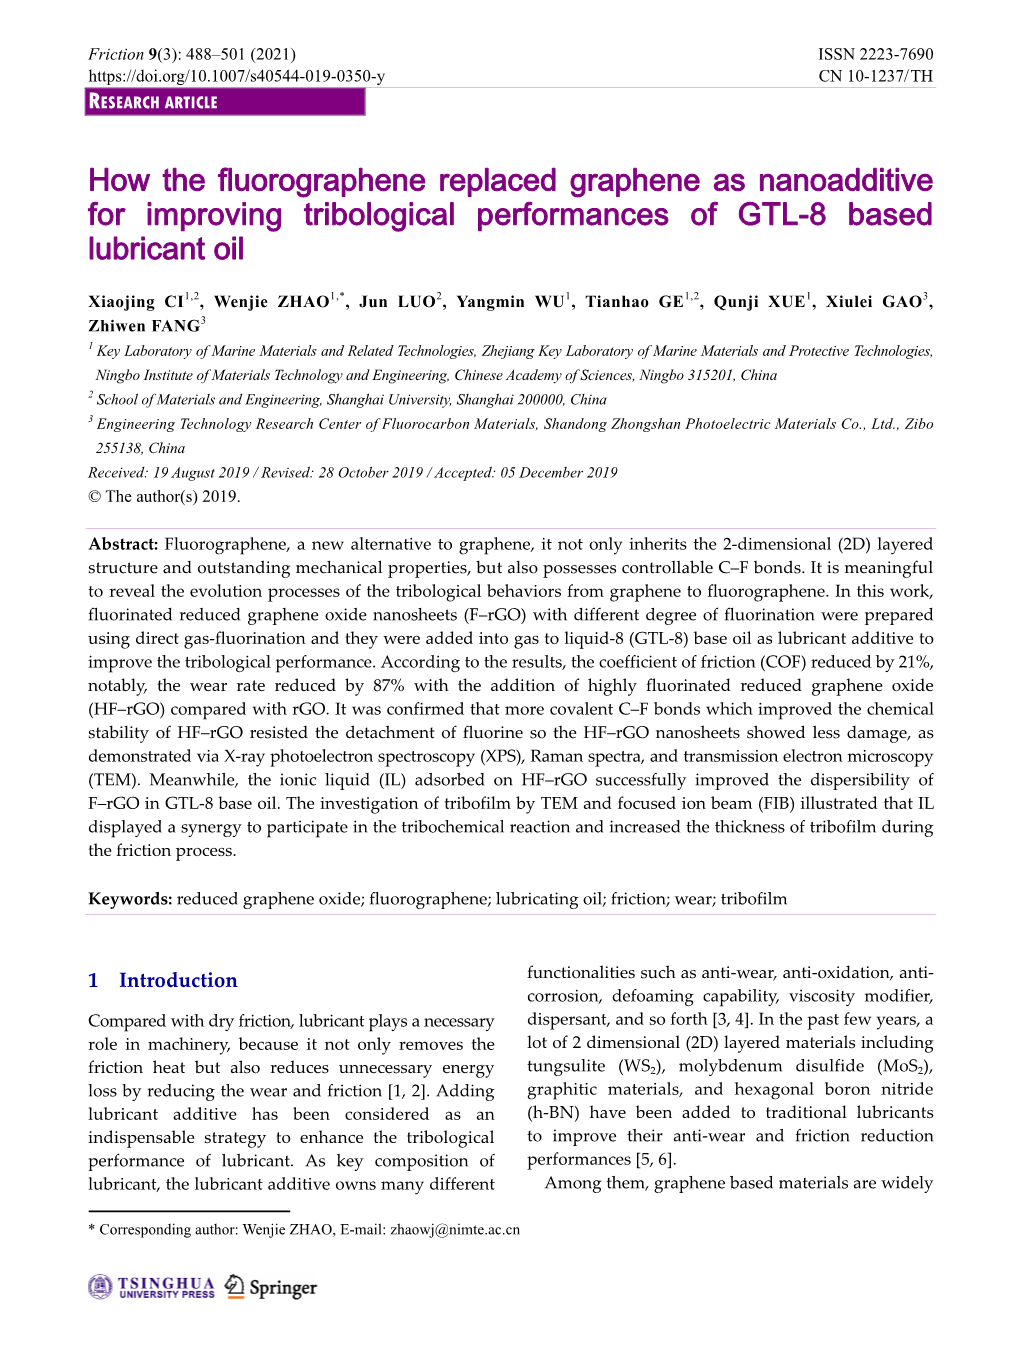 How the Fluorographene Replaced Graphene As Nanoadditive for Improving Tribological Performances of GTL-8 Based Lubricant Oil